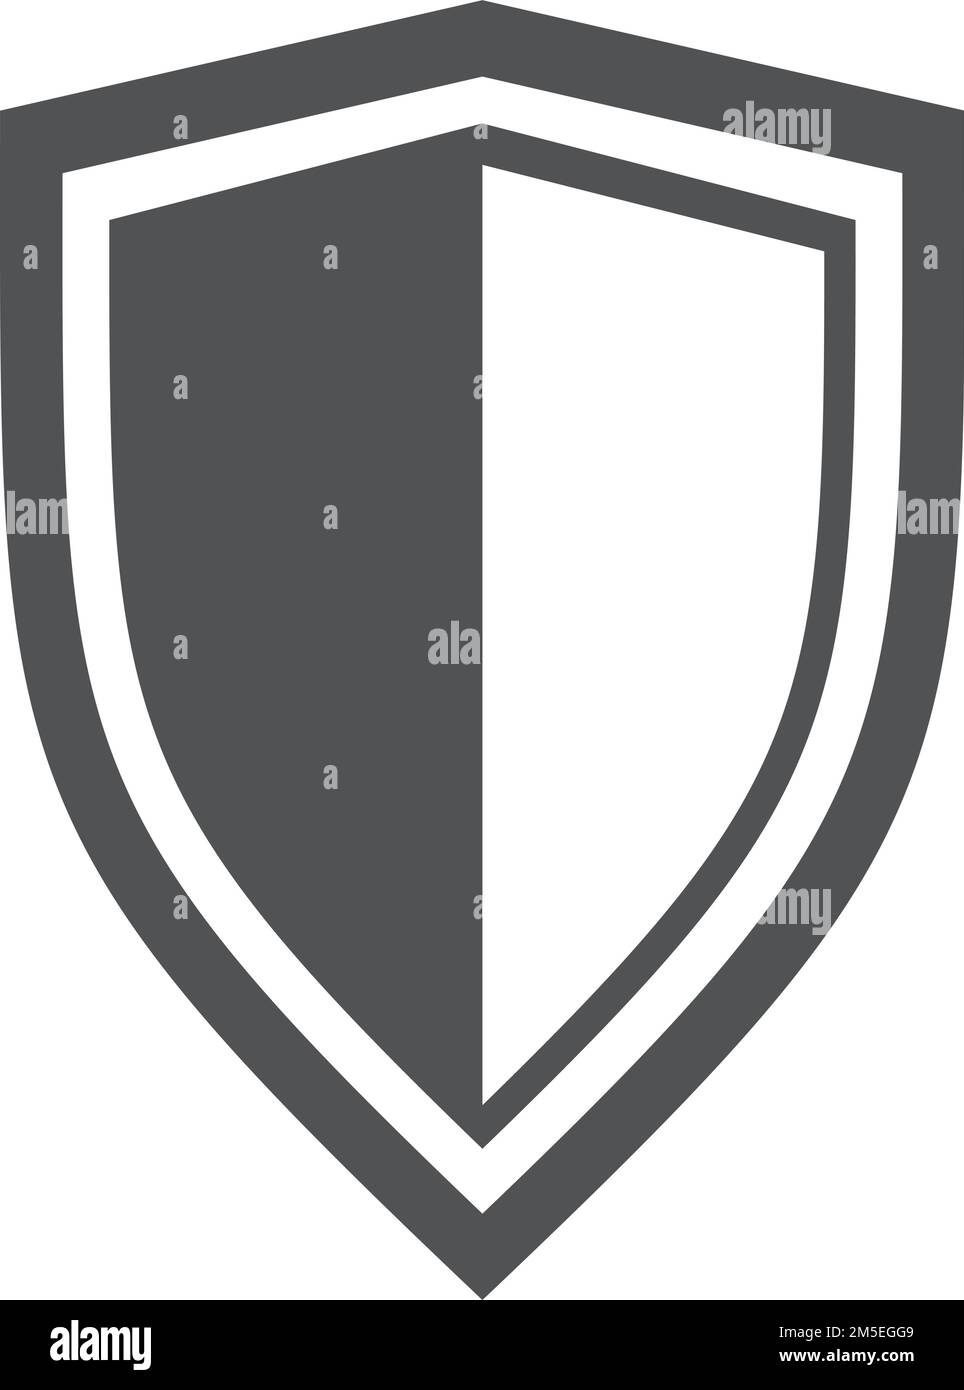 Shiels icon. Protection symbol. Safety and security sign Stock Vector